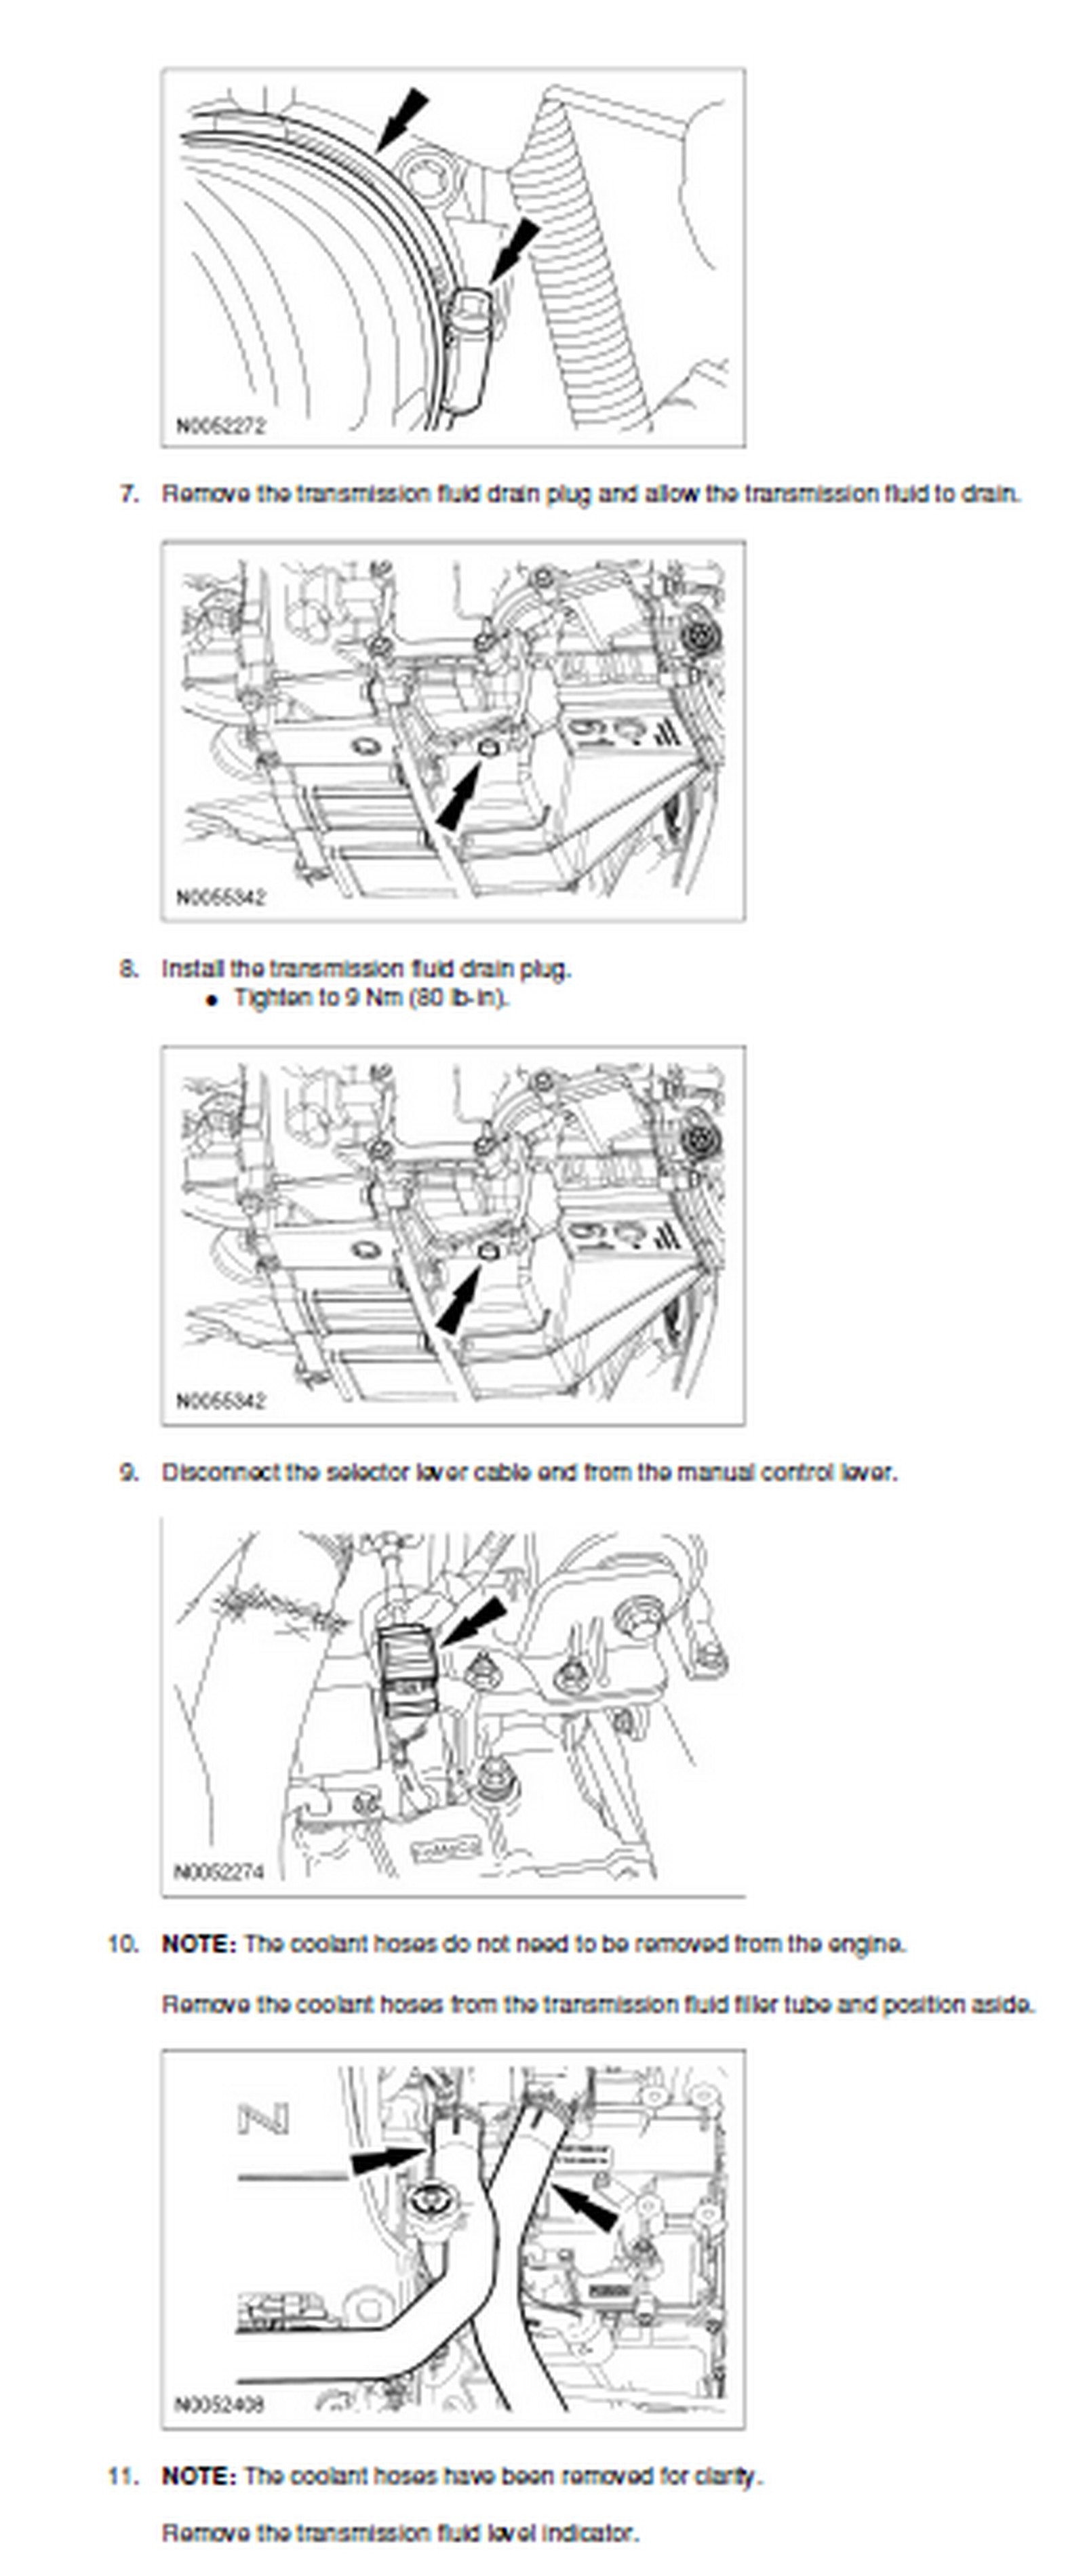 2007 ford Edge Engine Diagram How Do You Change the Output Speed sonsor On A 08 ford Edge Awd